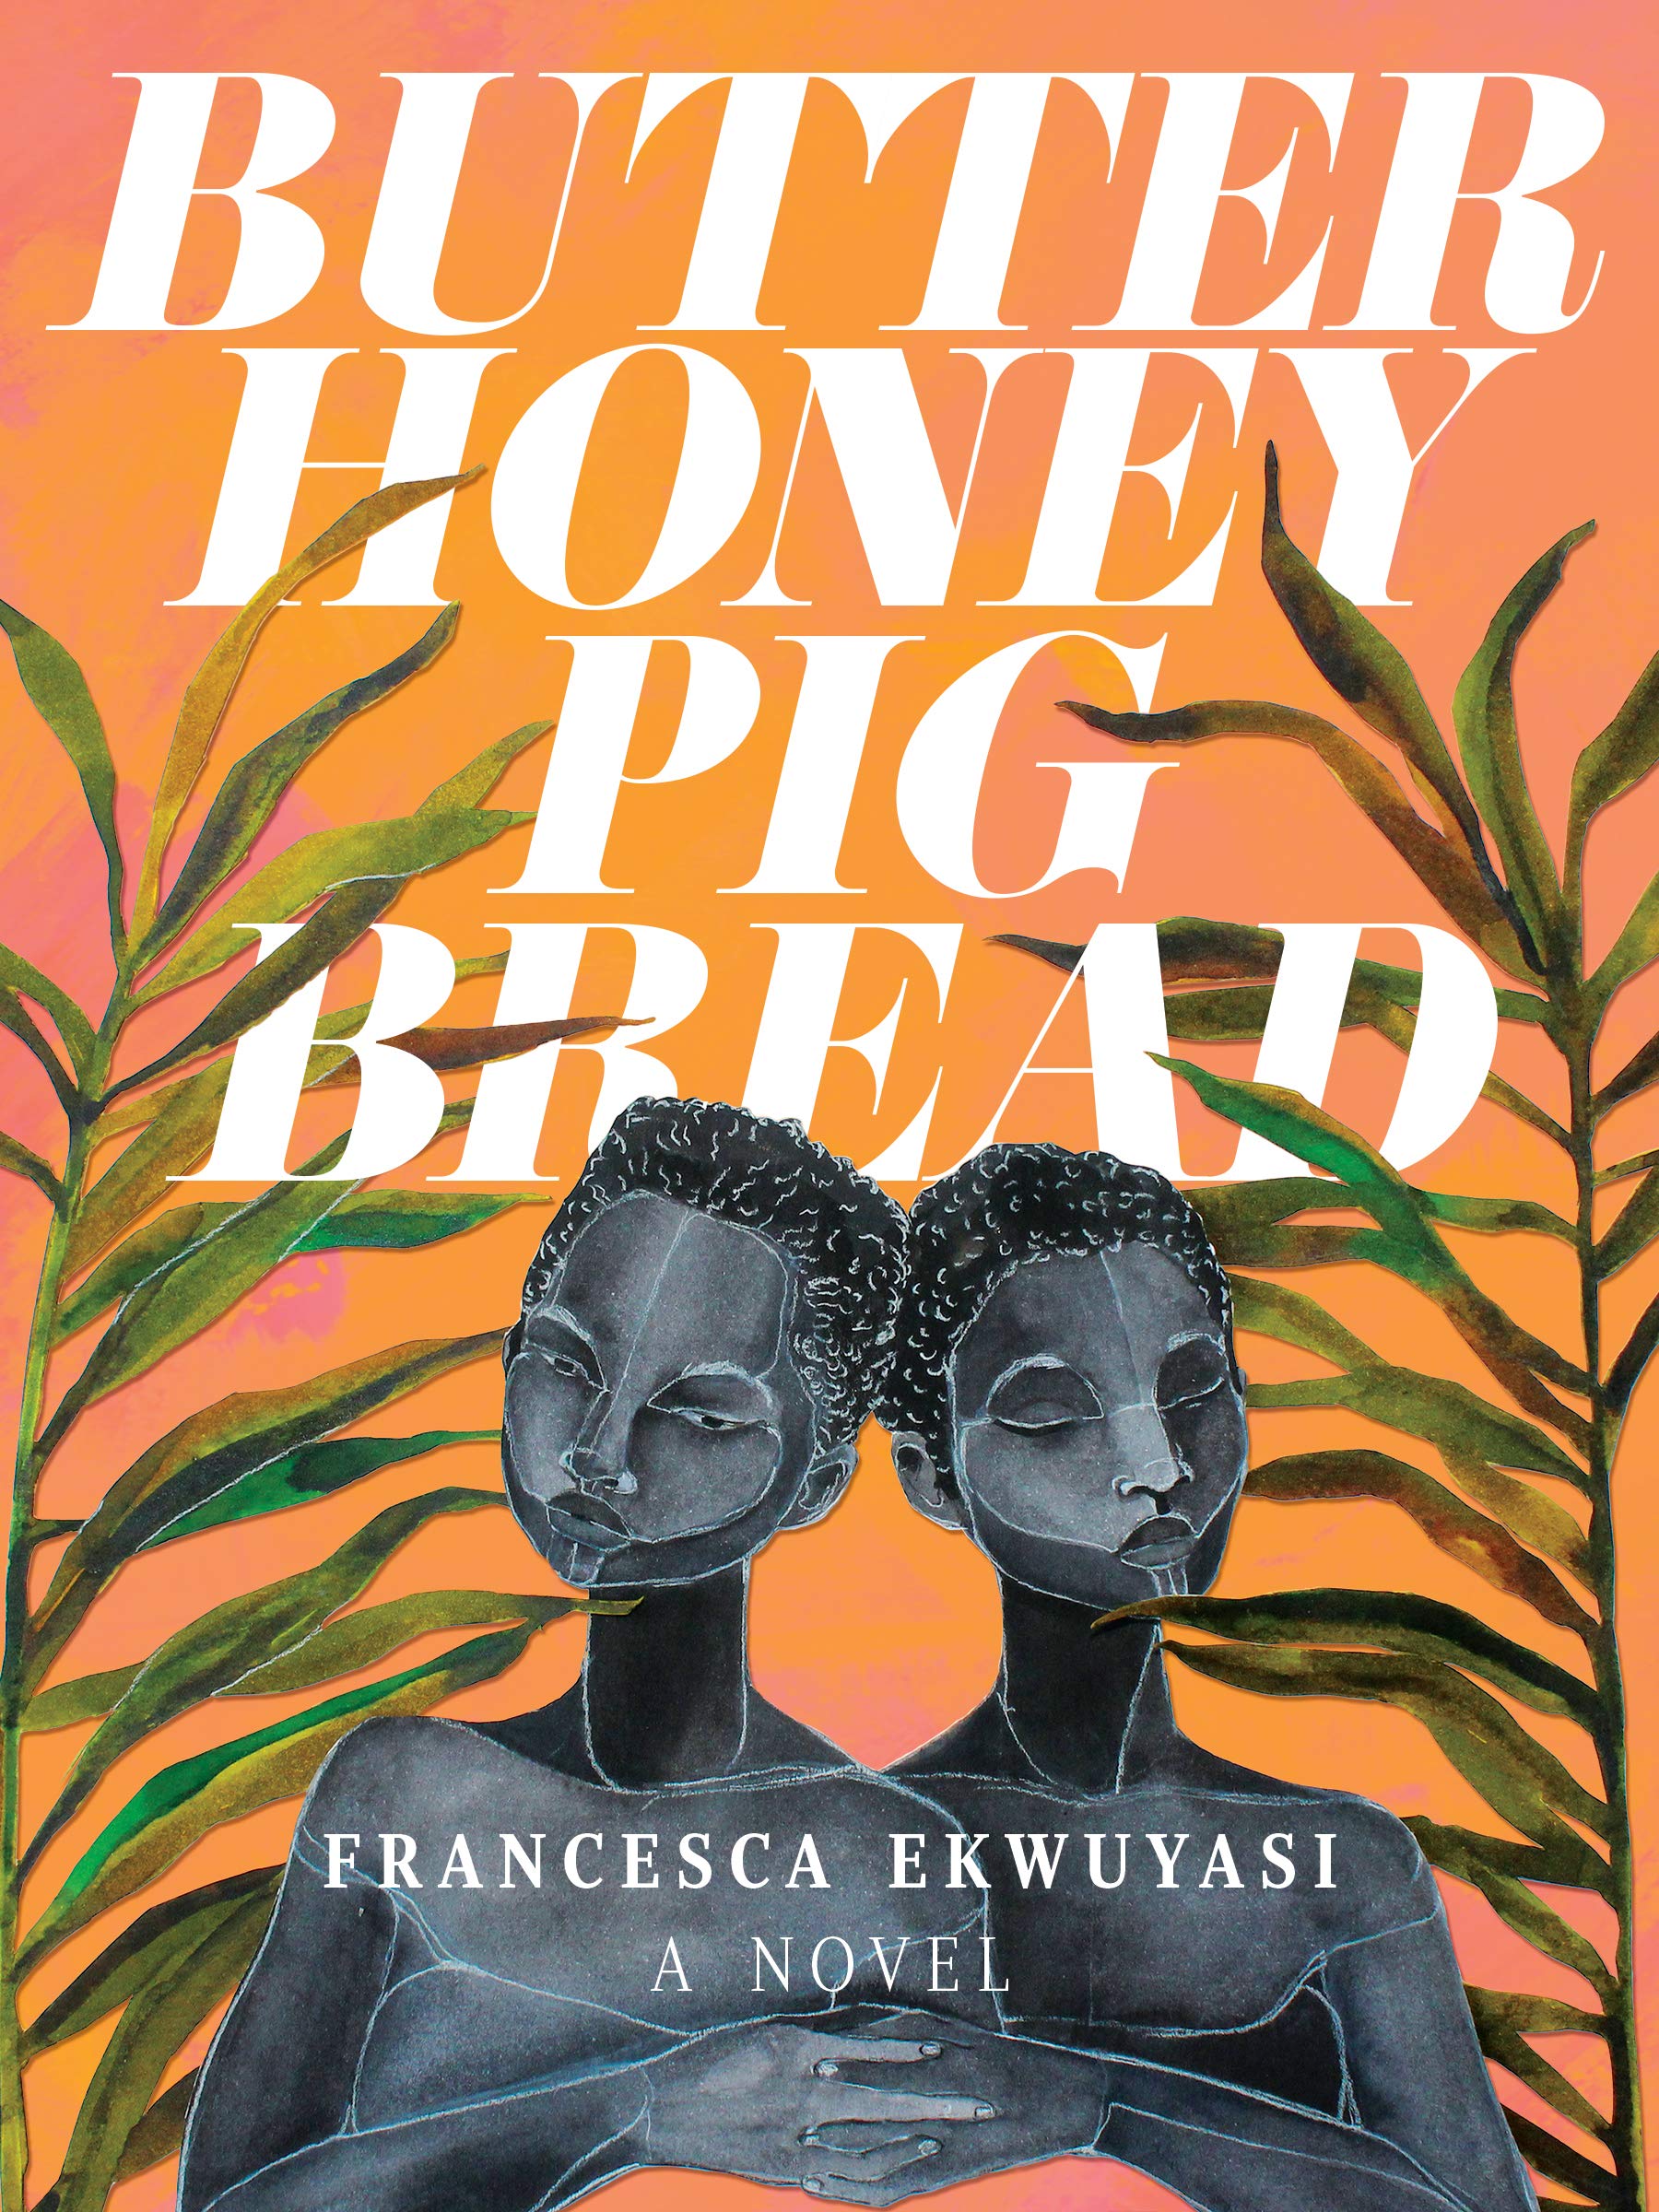 Food, silence and betrayal in Butter Honey Pig Bread by Francesca Ekwuyasi. A Review